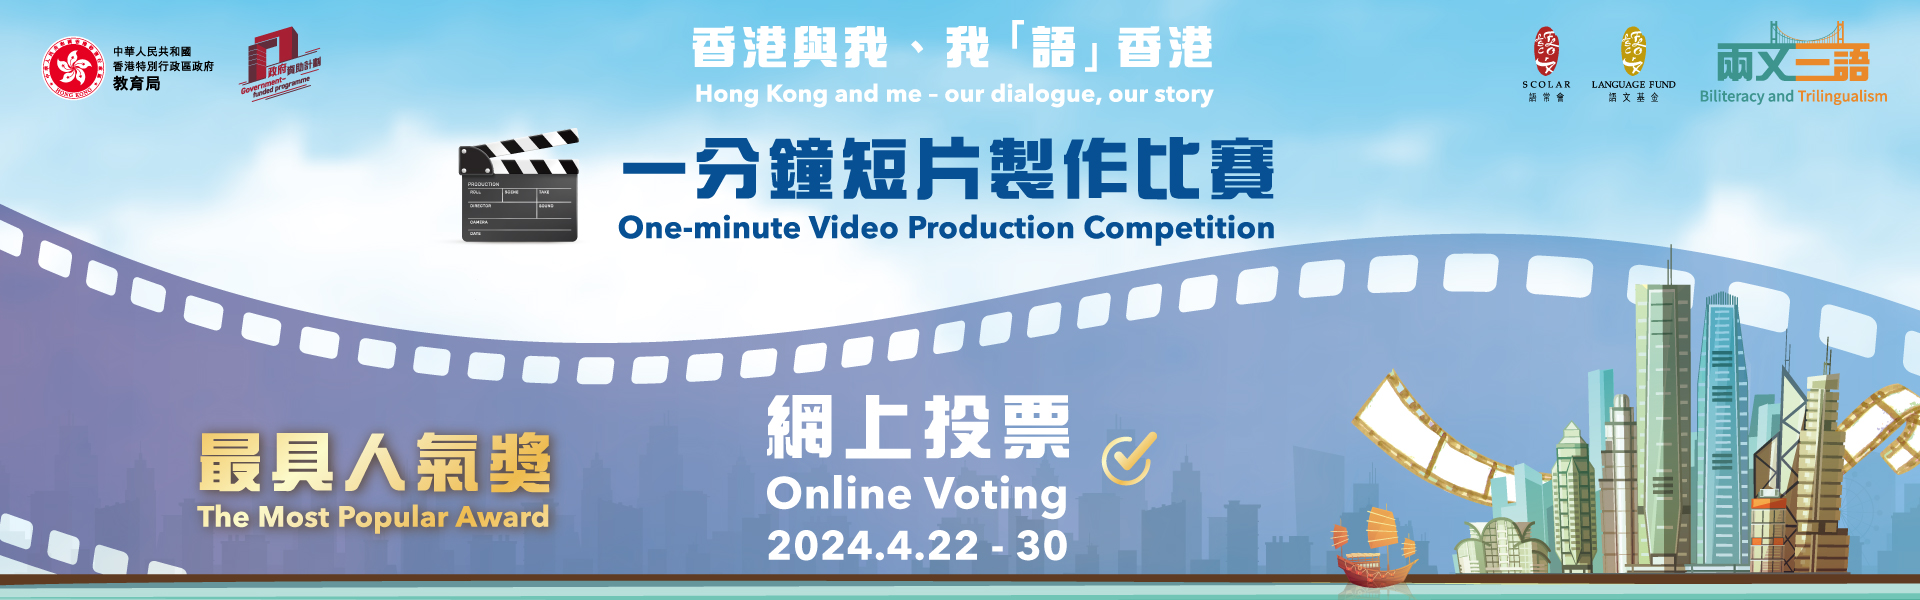 One-minute Video Production Competition